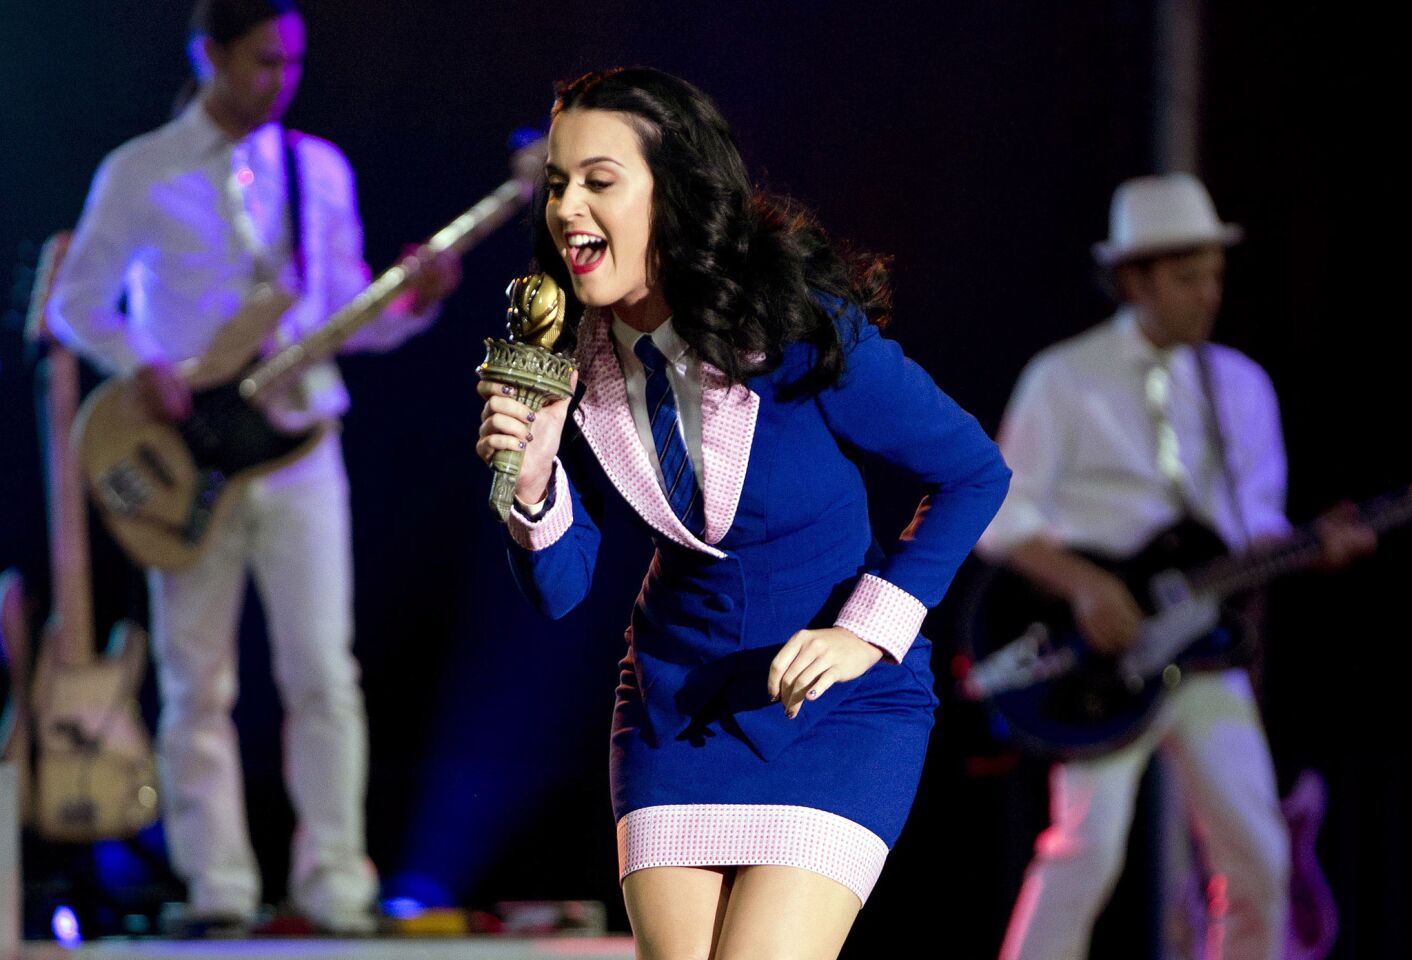 Katy Perry delivers a song for a crowd before the arrival of President Barack Obama at a campaign rally in October 2012.